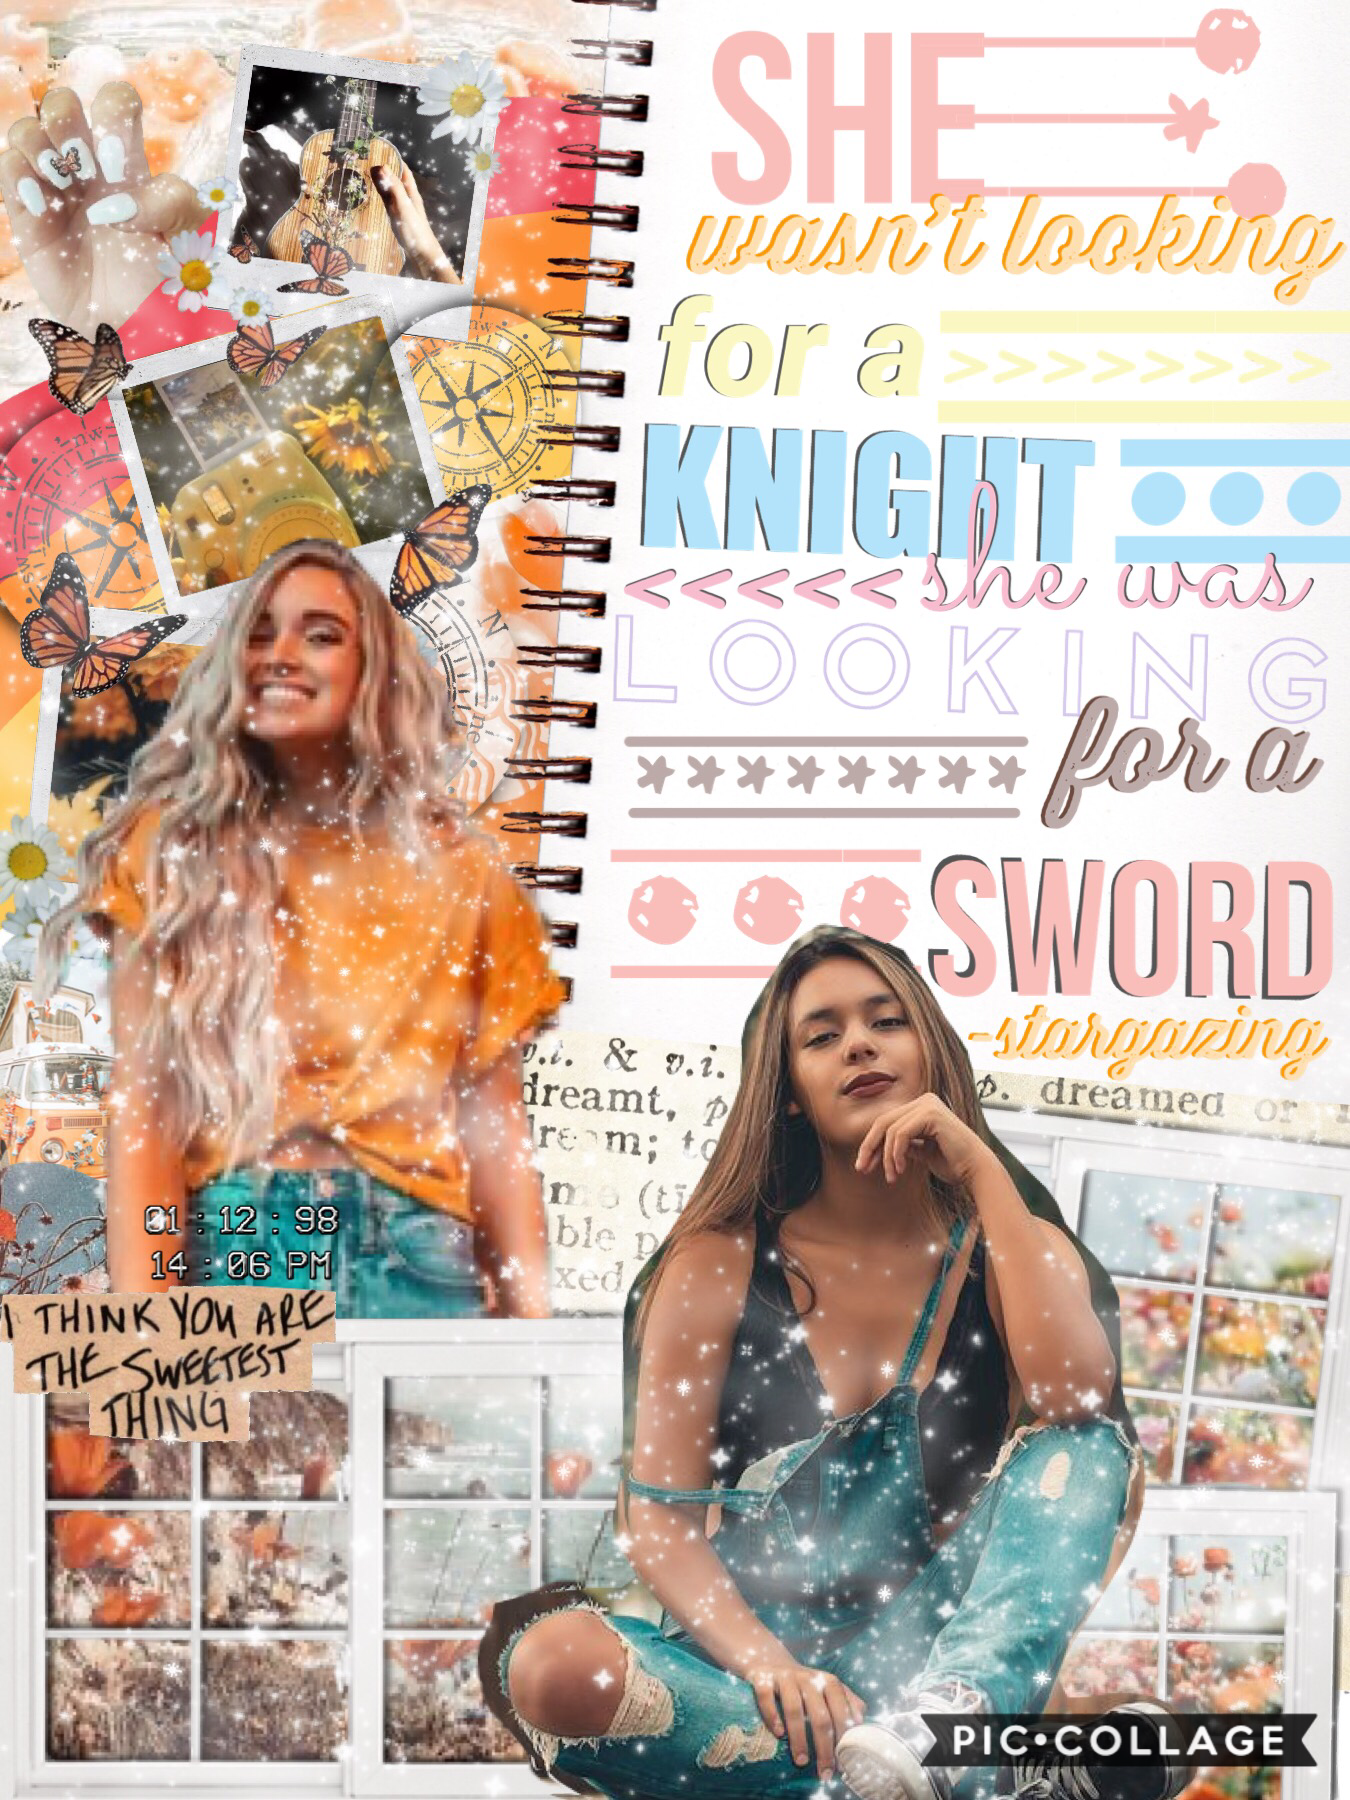 TAP
Another collage in my
G.R.L. P.W.R. theme! Hope
you like it! If anyone wants 
to collab you are more than
welcome! Just comment:)